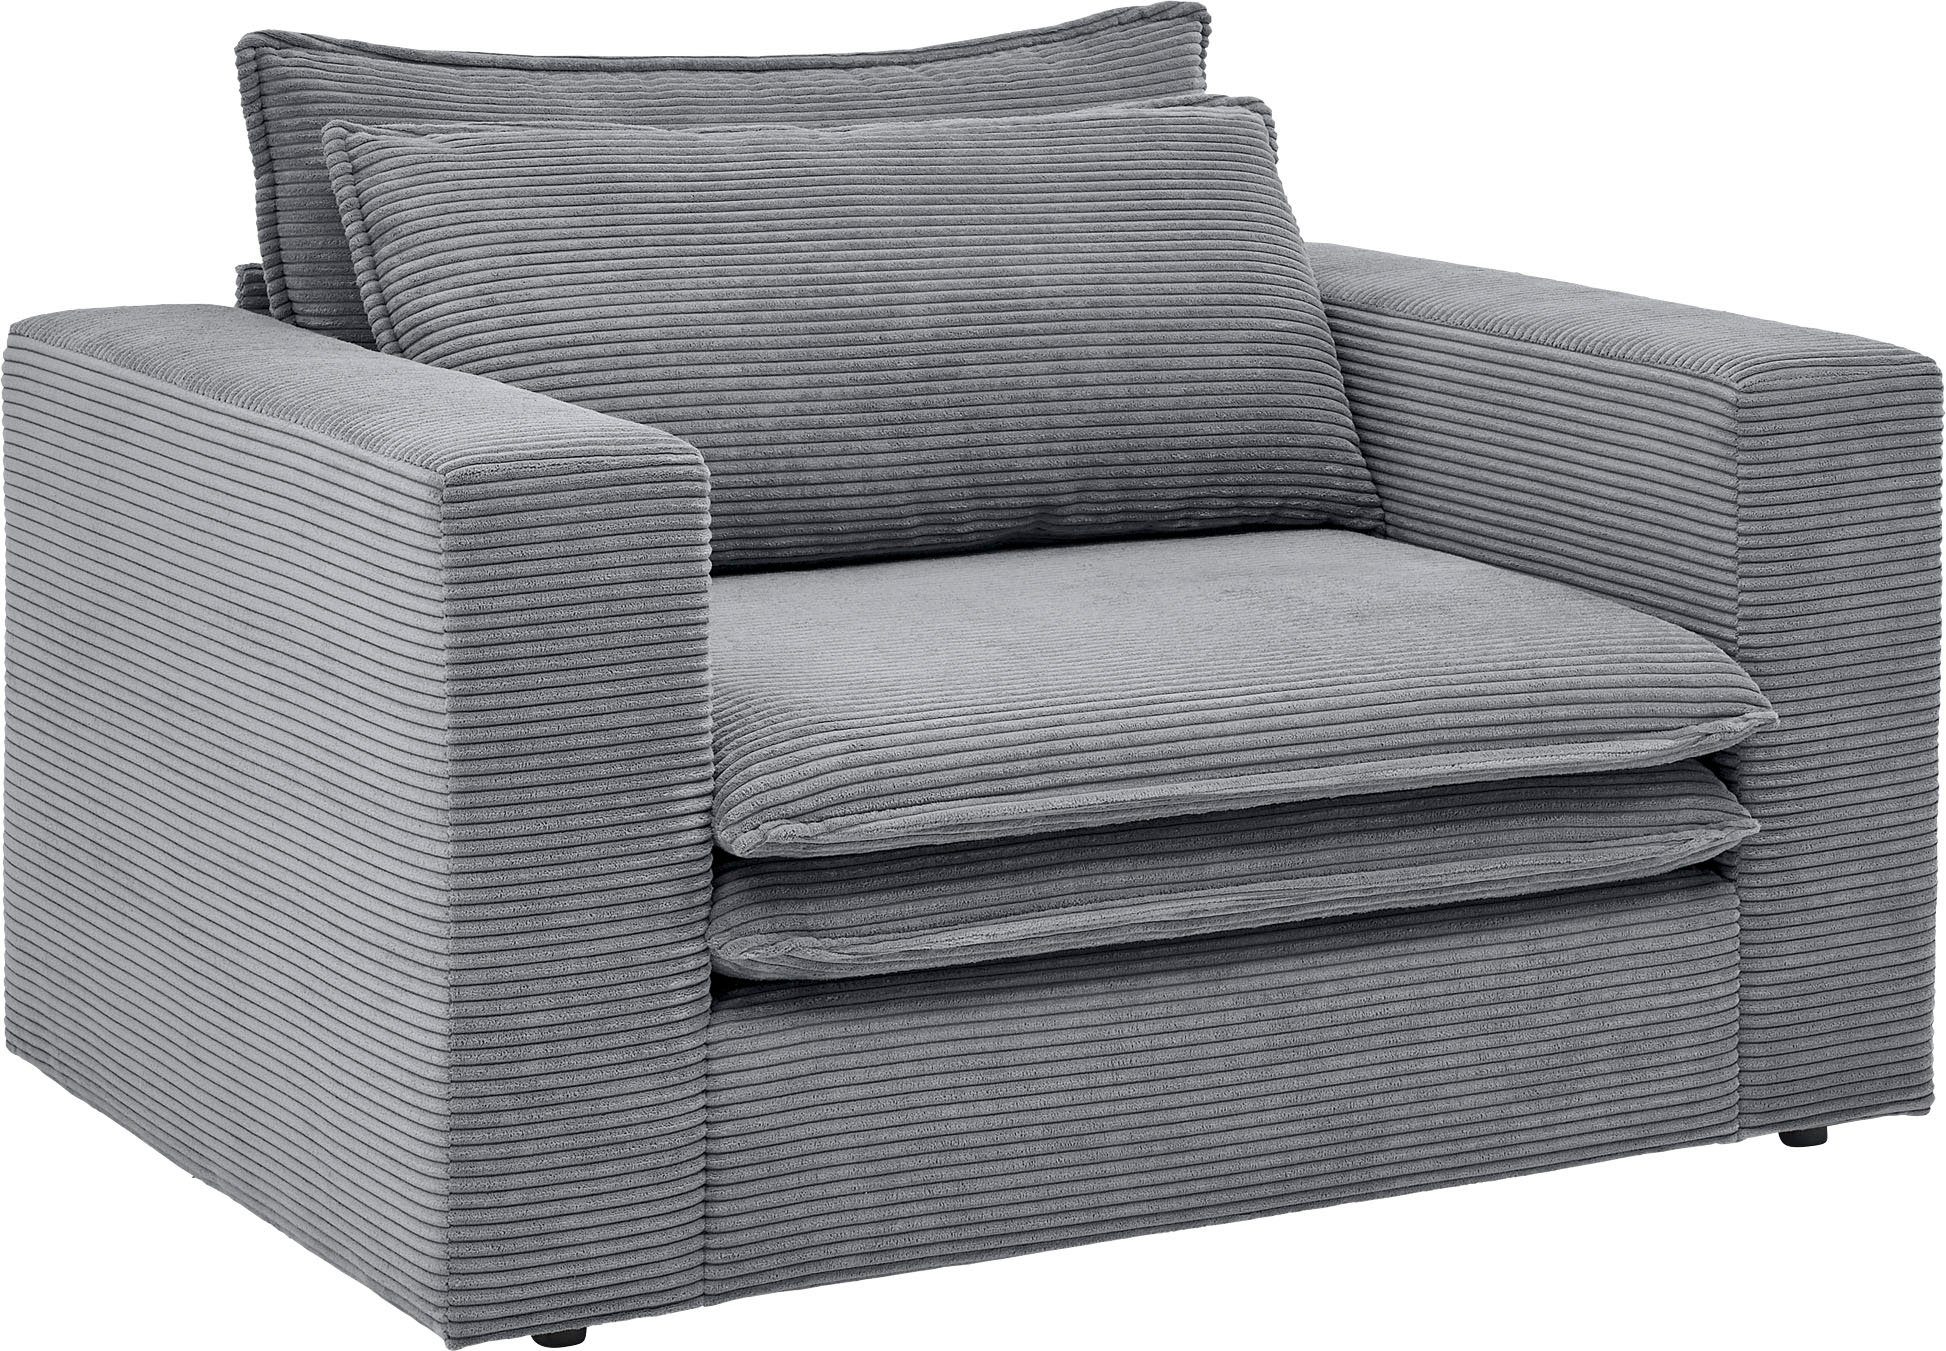 Style Loveseat of Places PIAGGE, Anthrazit Loveseat Cord, Hochwertiger trendiger